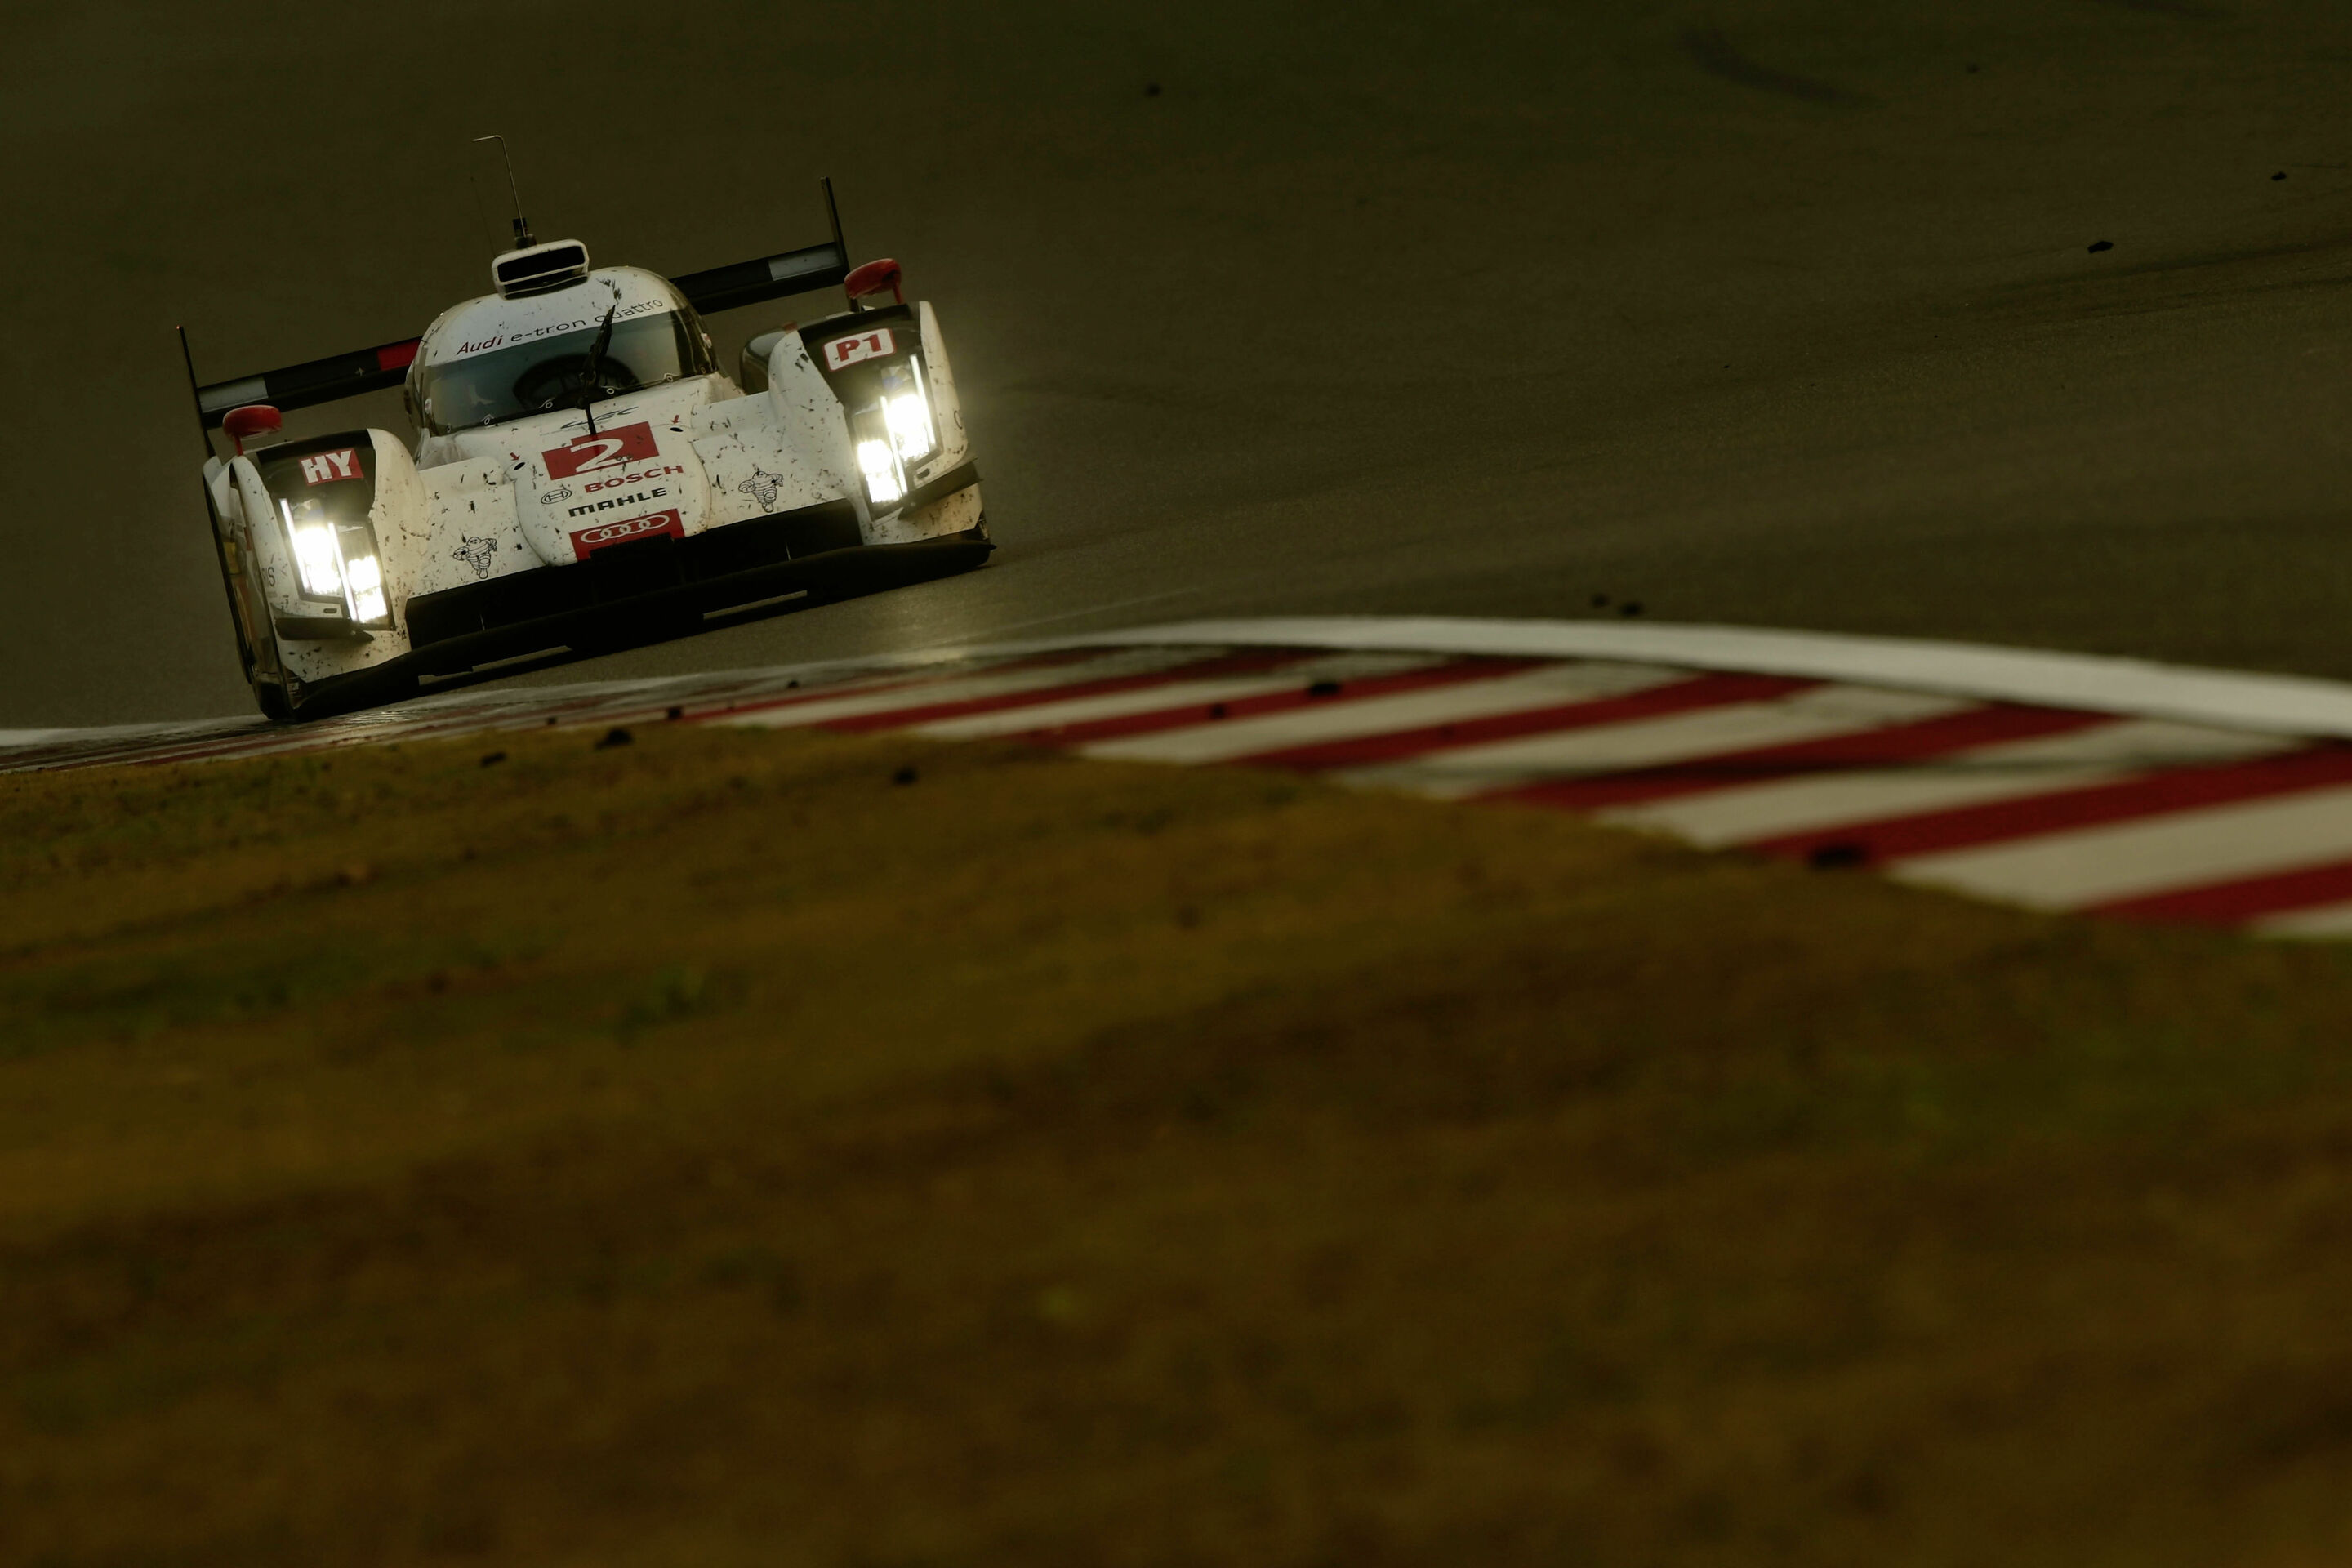 Audi scores 22 points in battle for WEC title in China